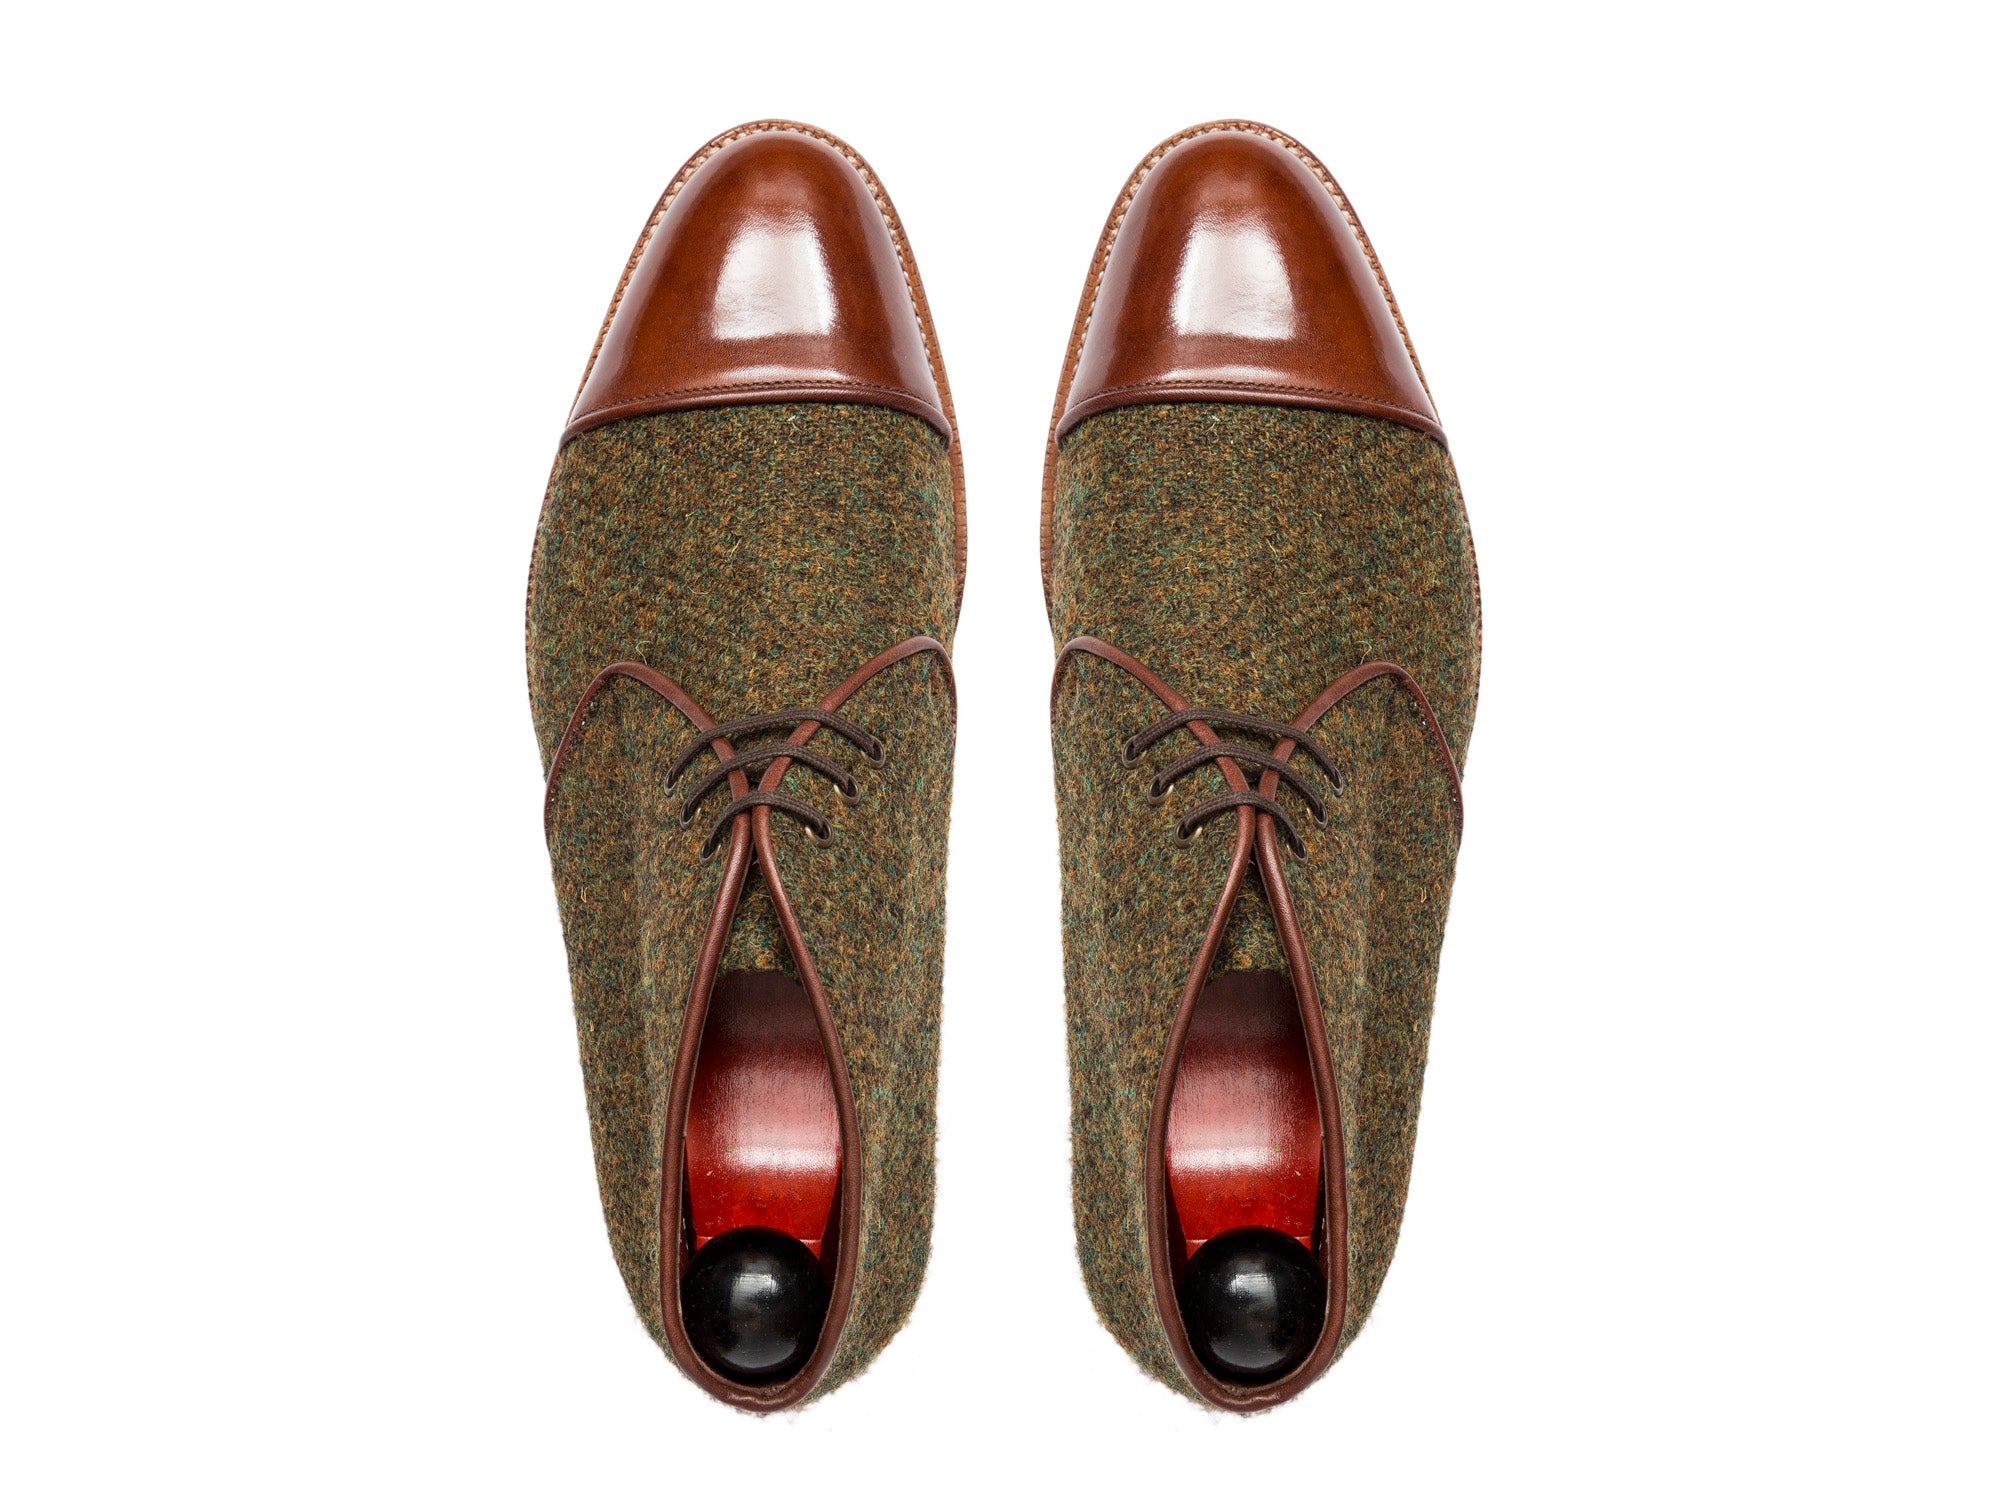 Des Moines - MTO - Mustard Tweed / Gold Museum Calf - TMG Last - Natural Single Leather Sole